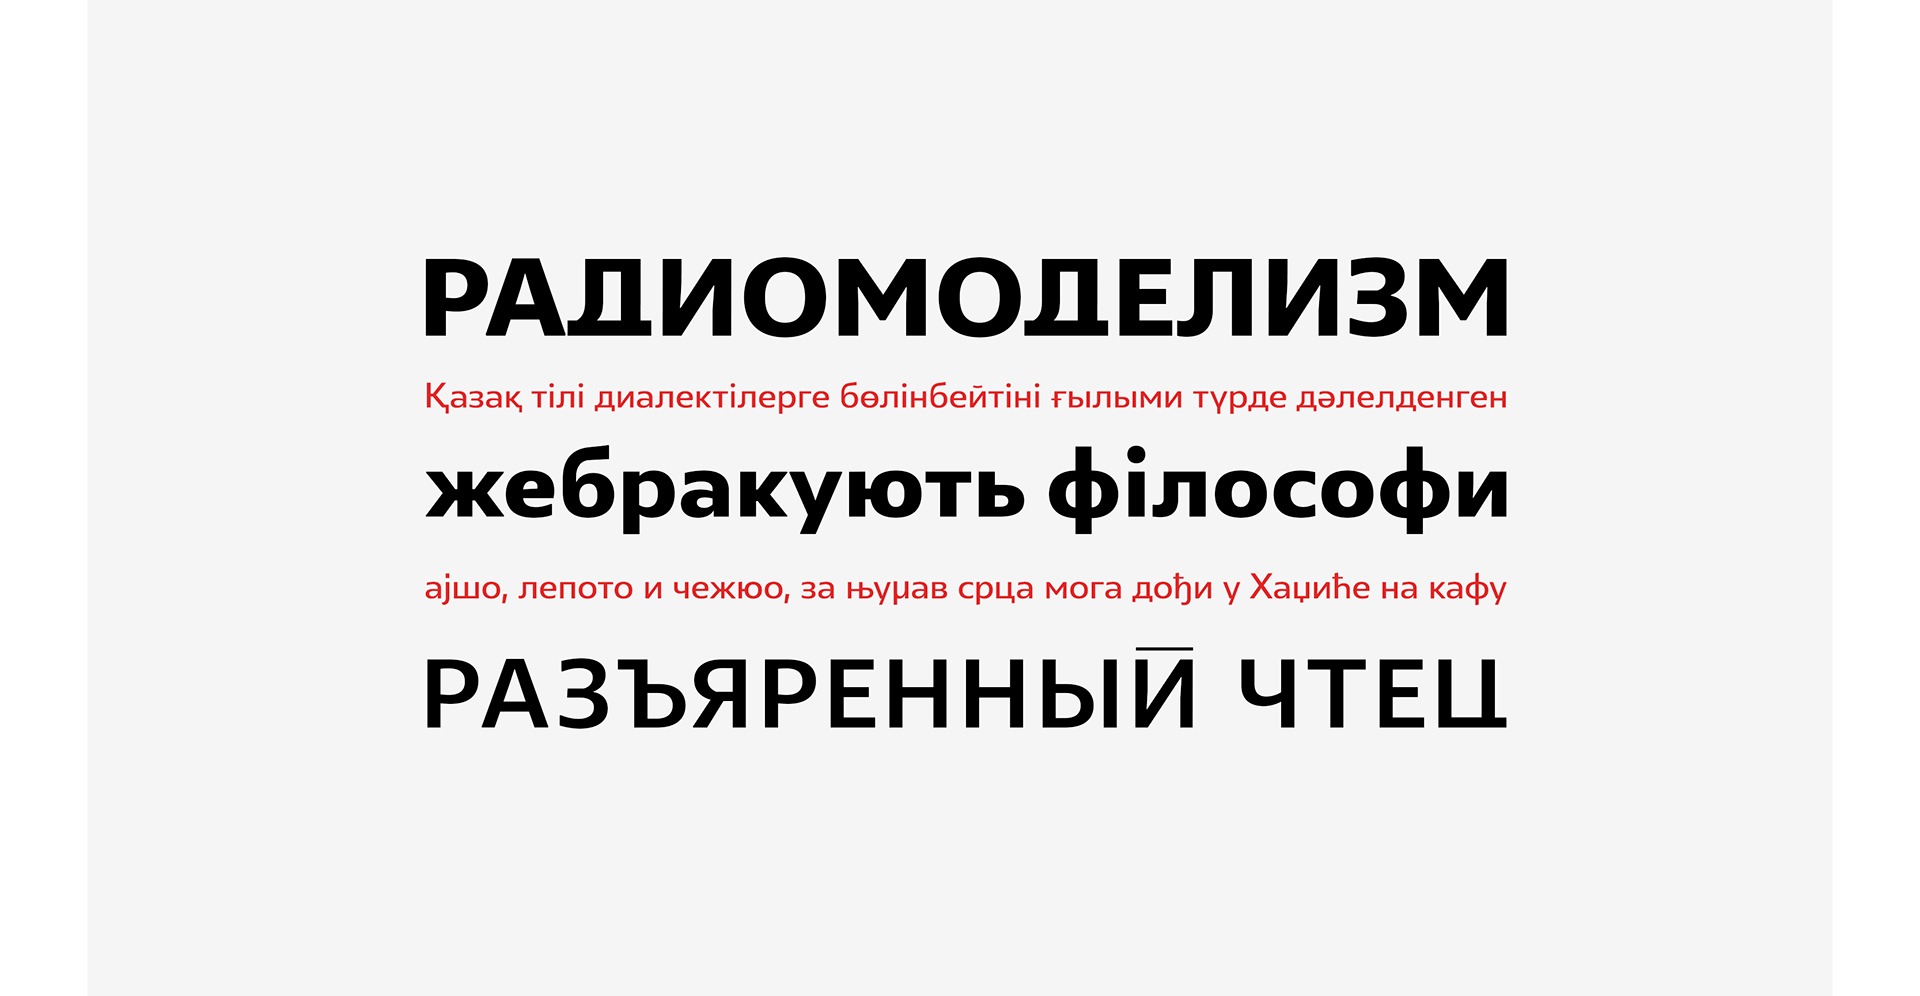 Lexis Alt XThin Italic Font preview